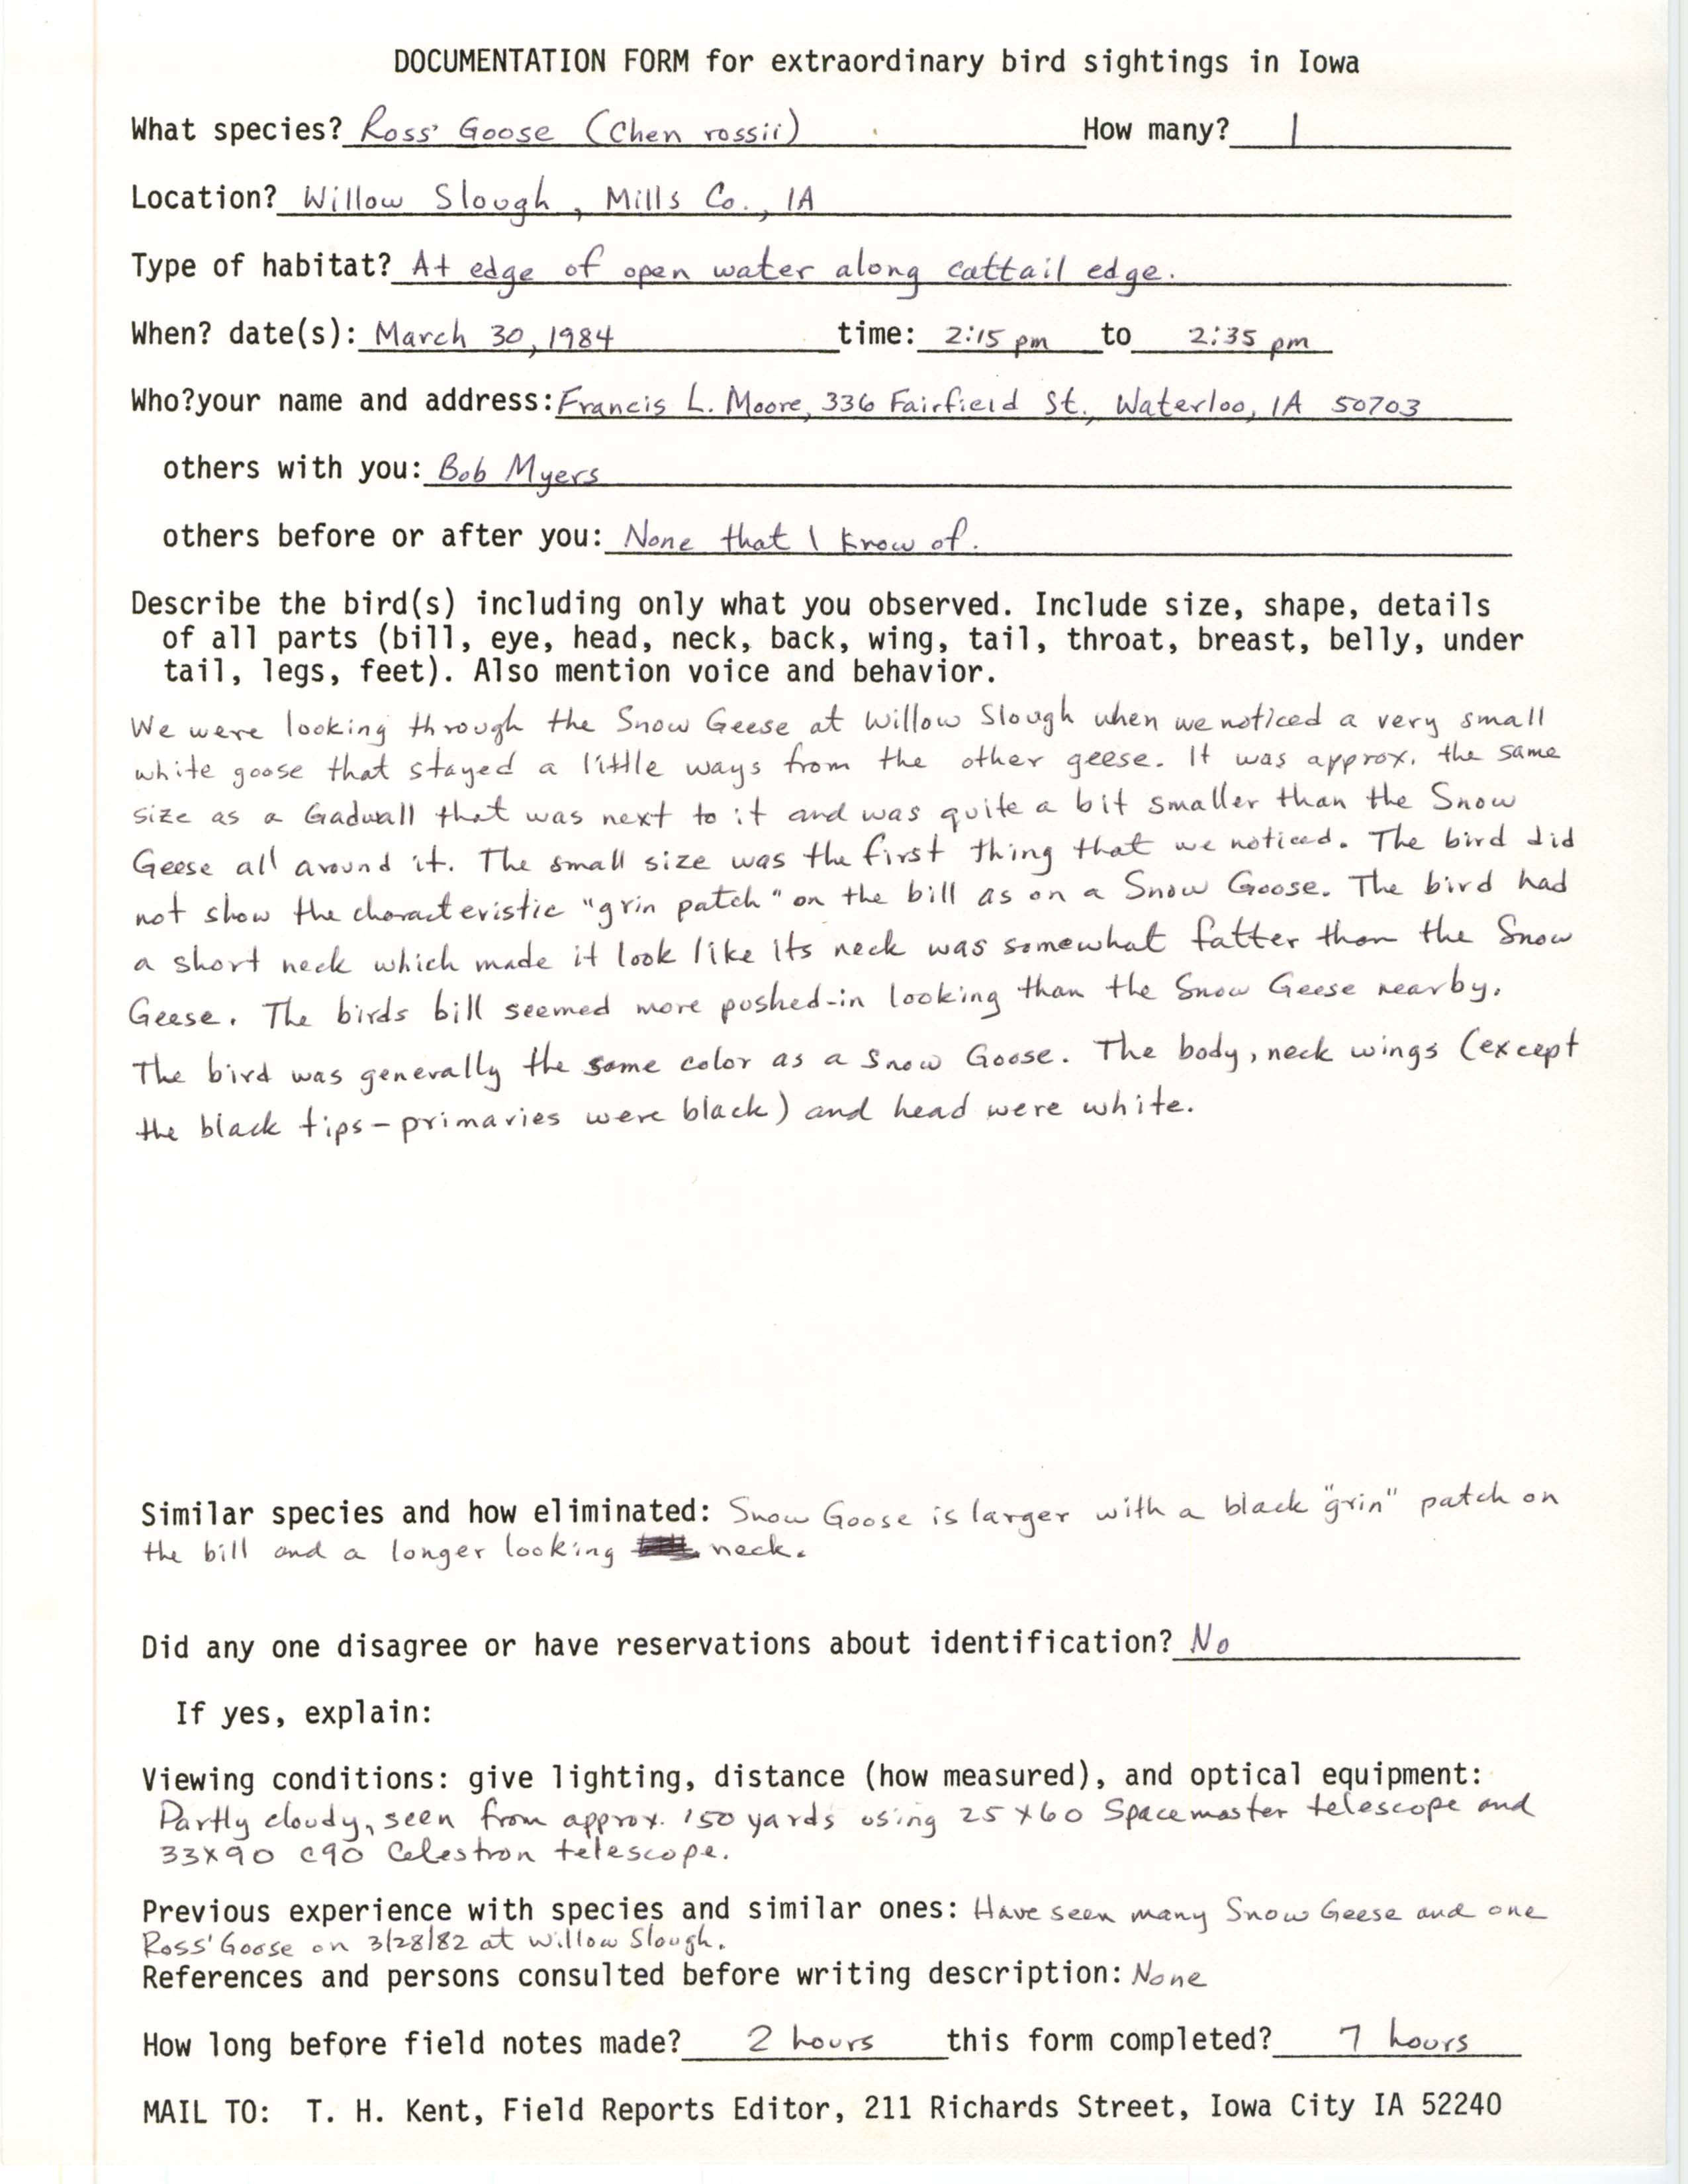 Rare bird documentation form for Ross' Goose at Willow Slough, 1984